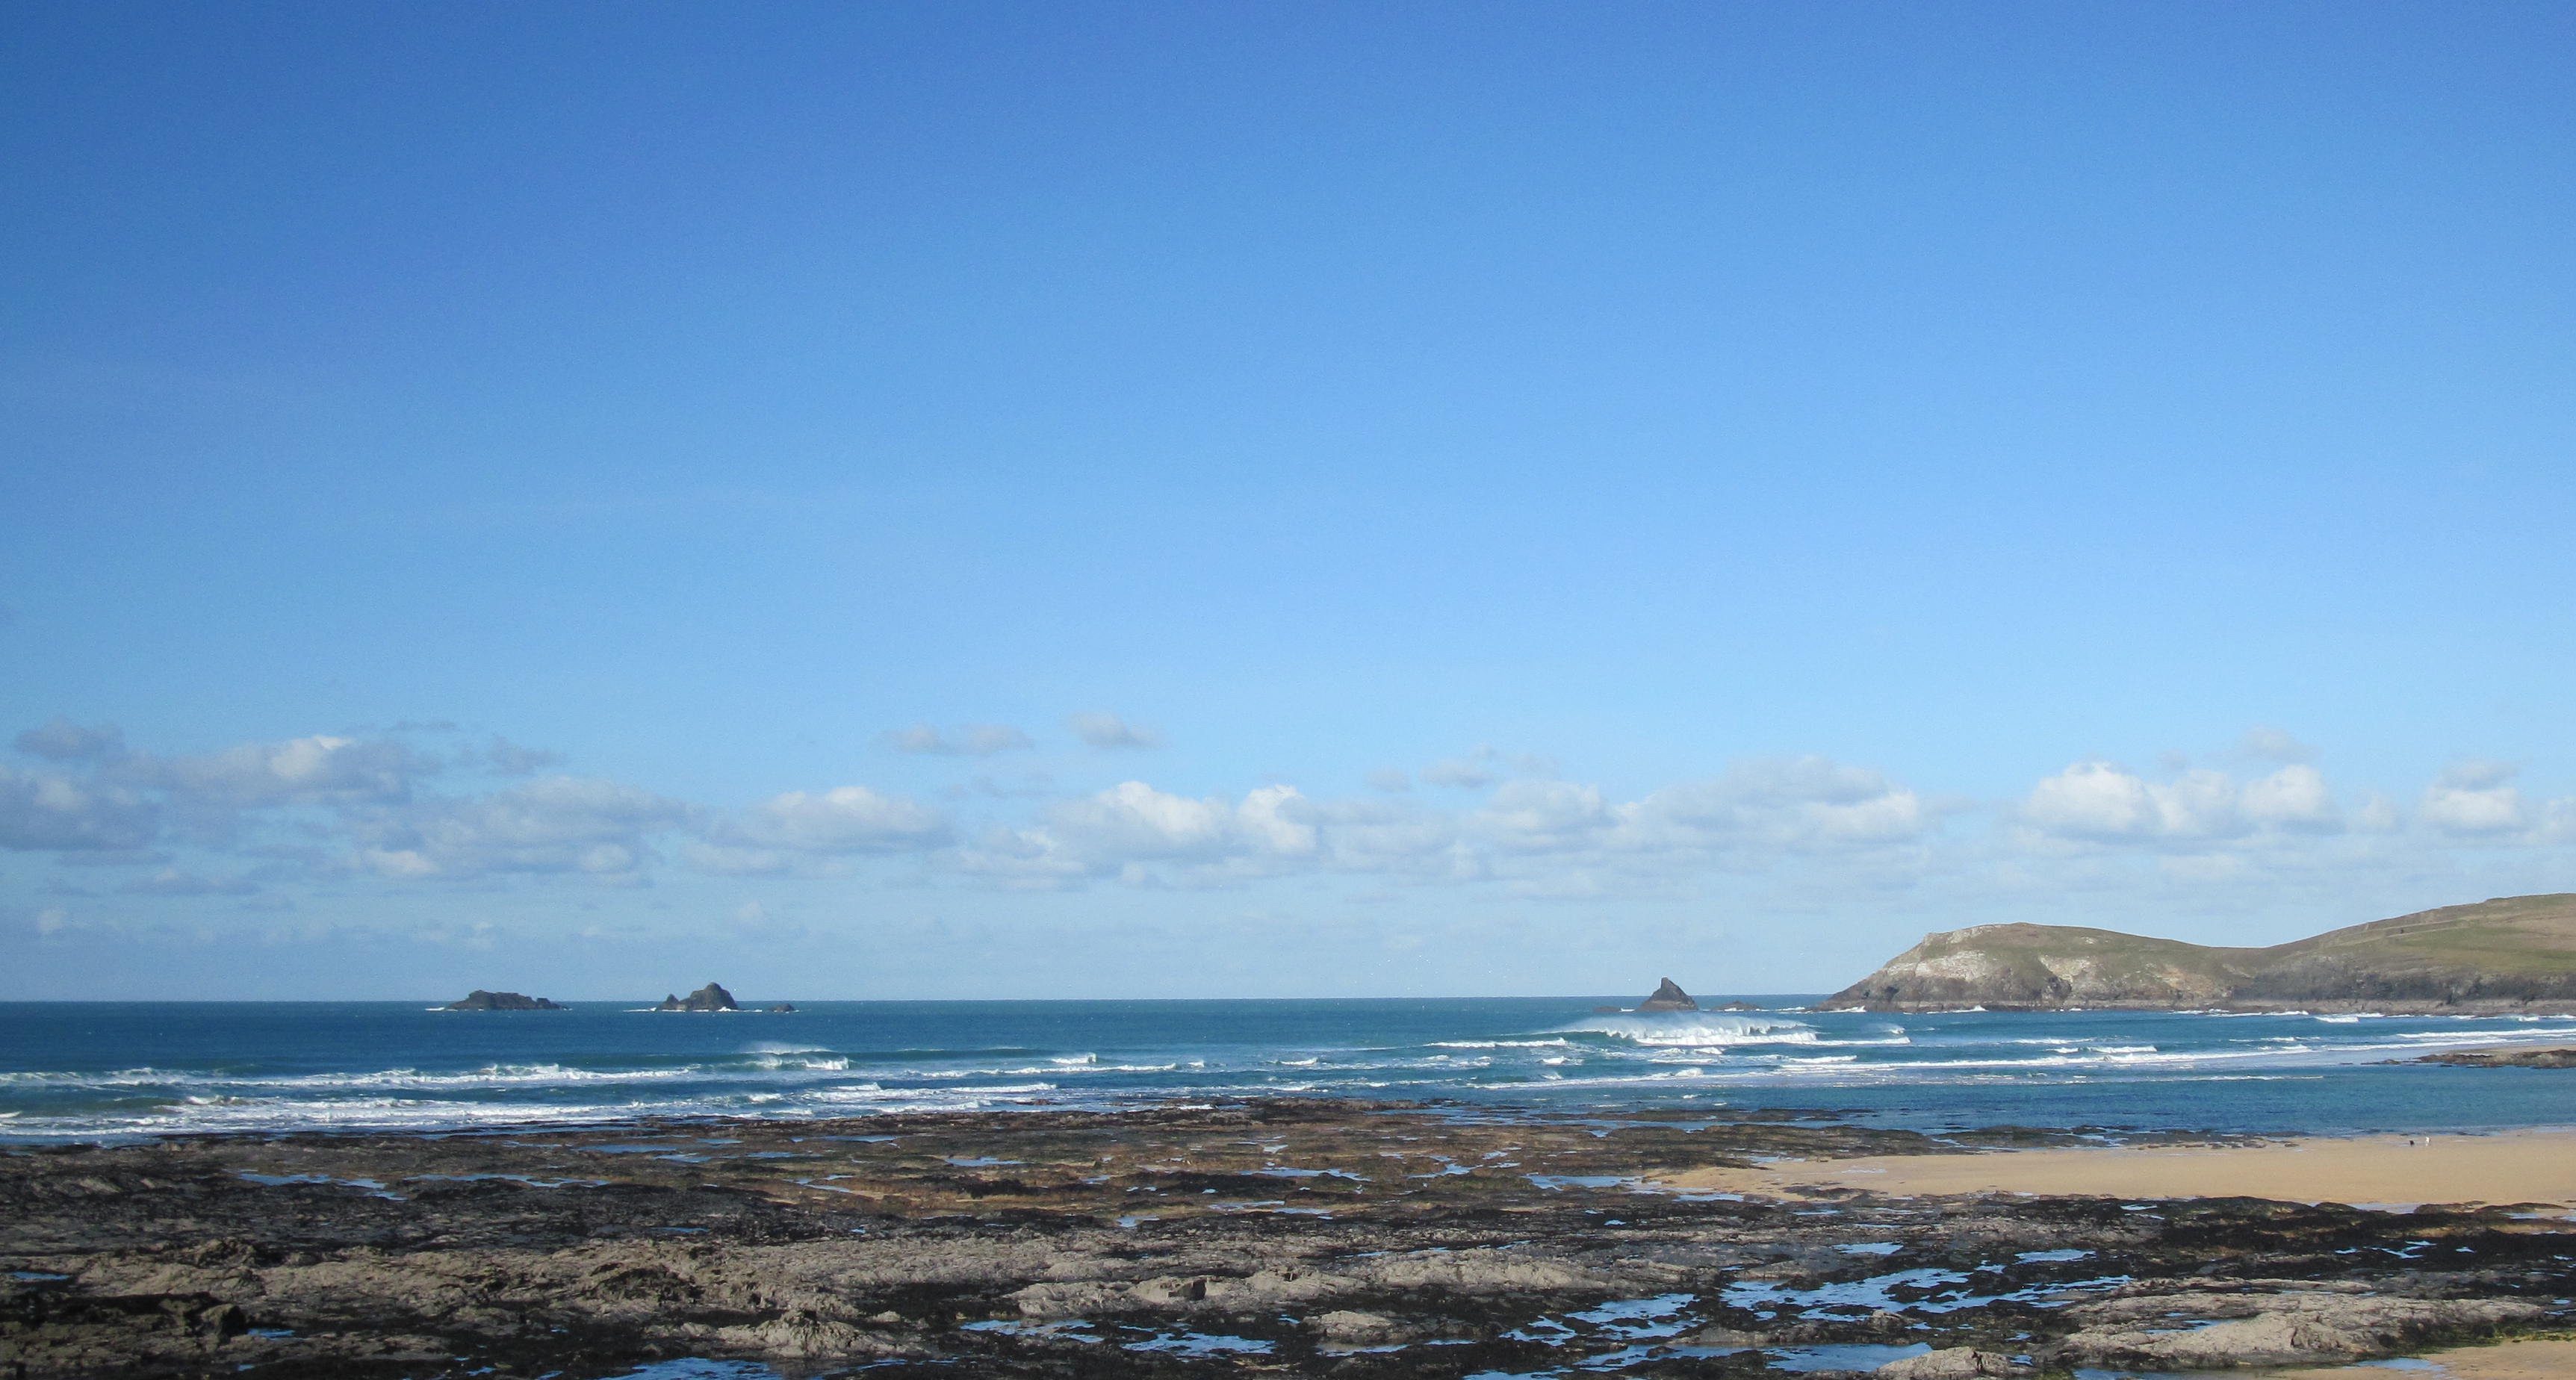 Surf Report for Tuesday 3rd February 2015